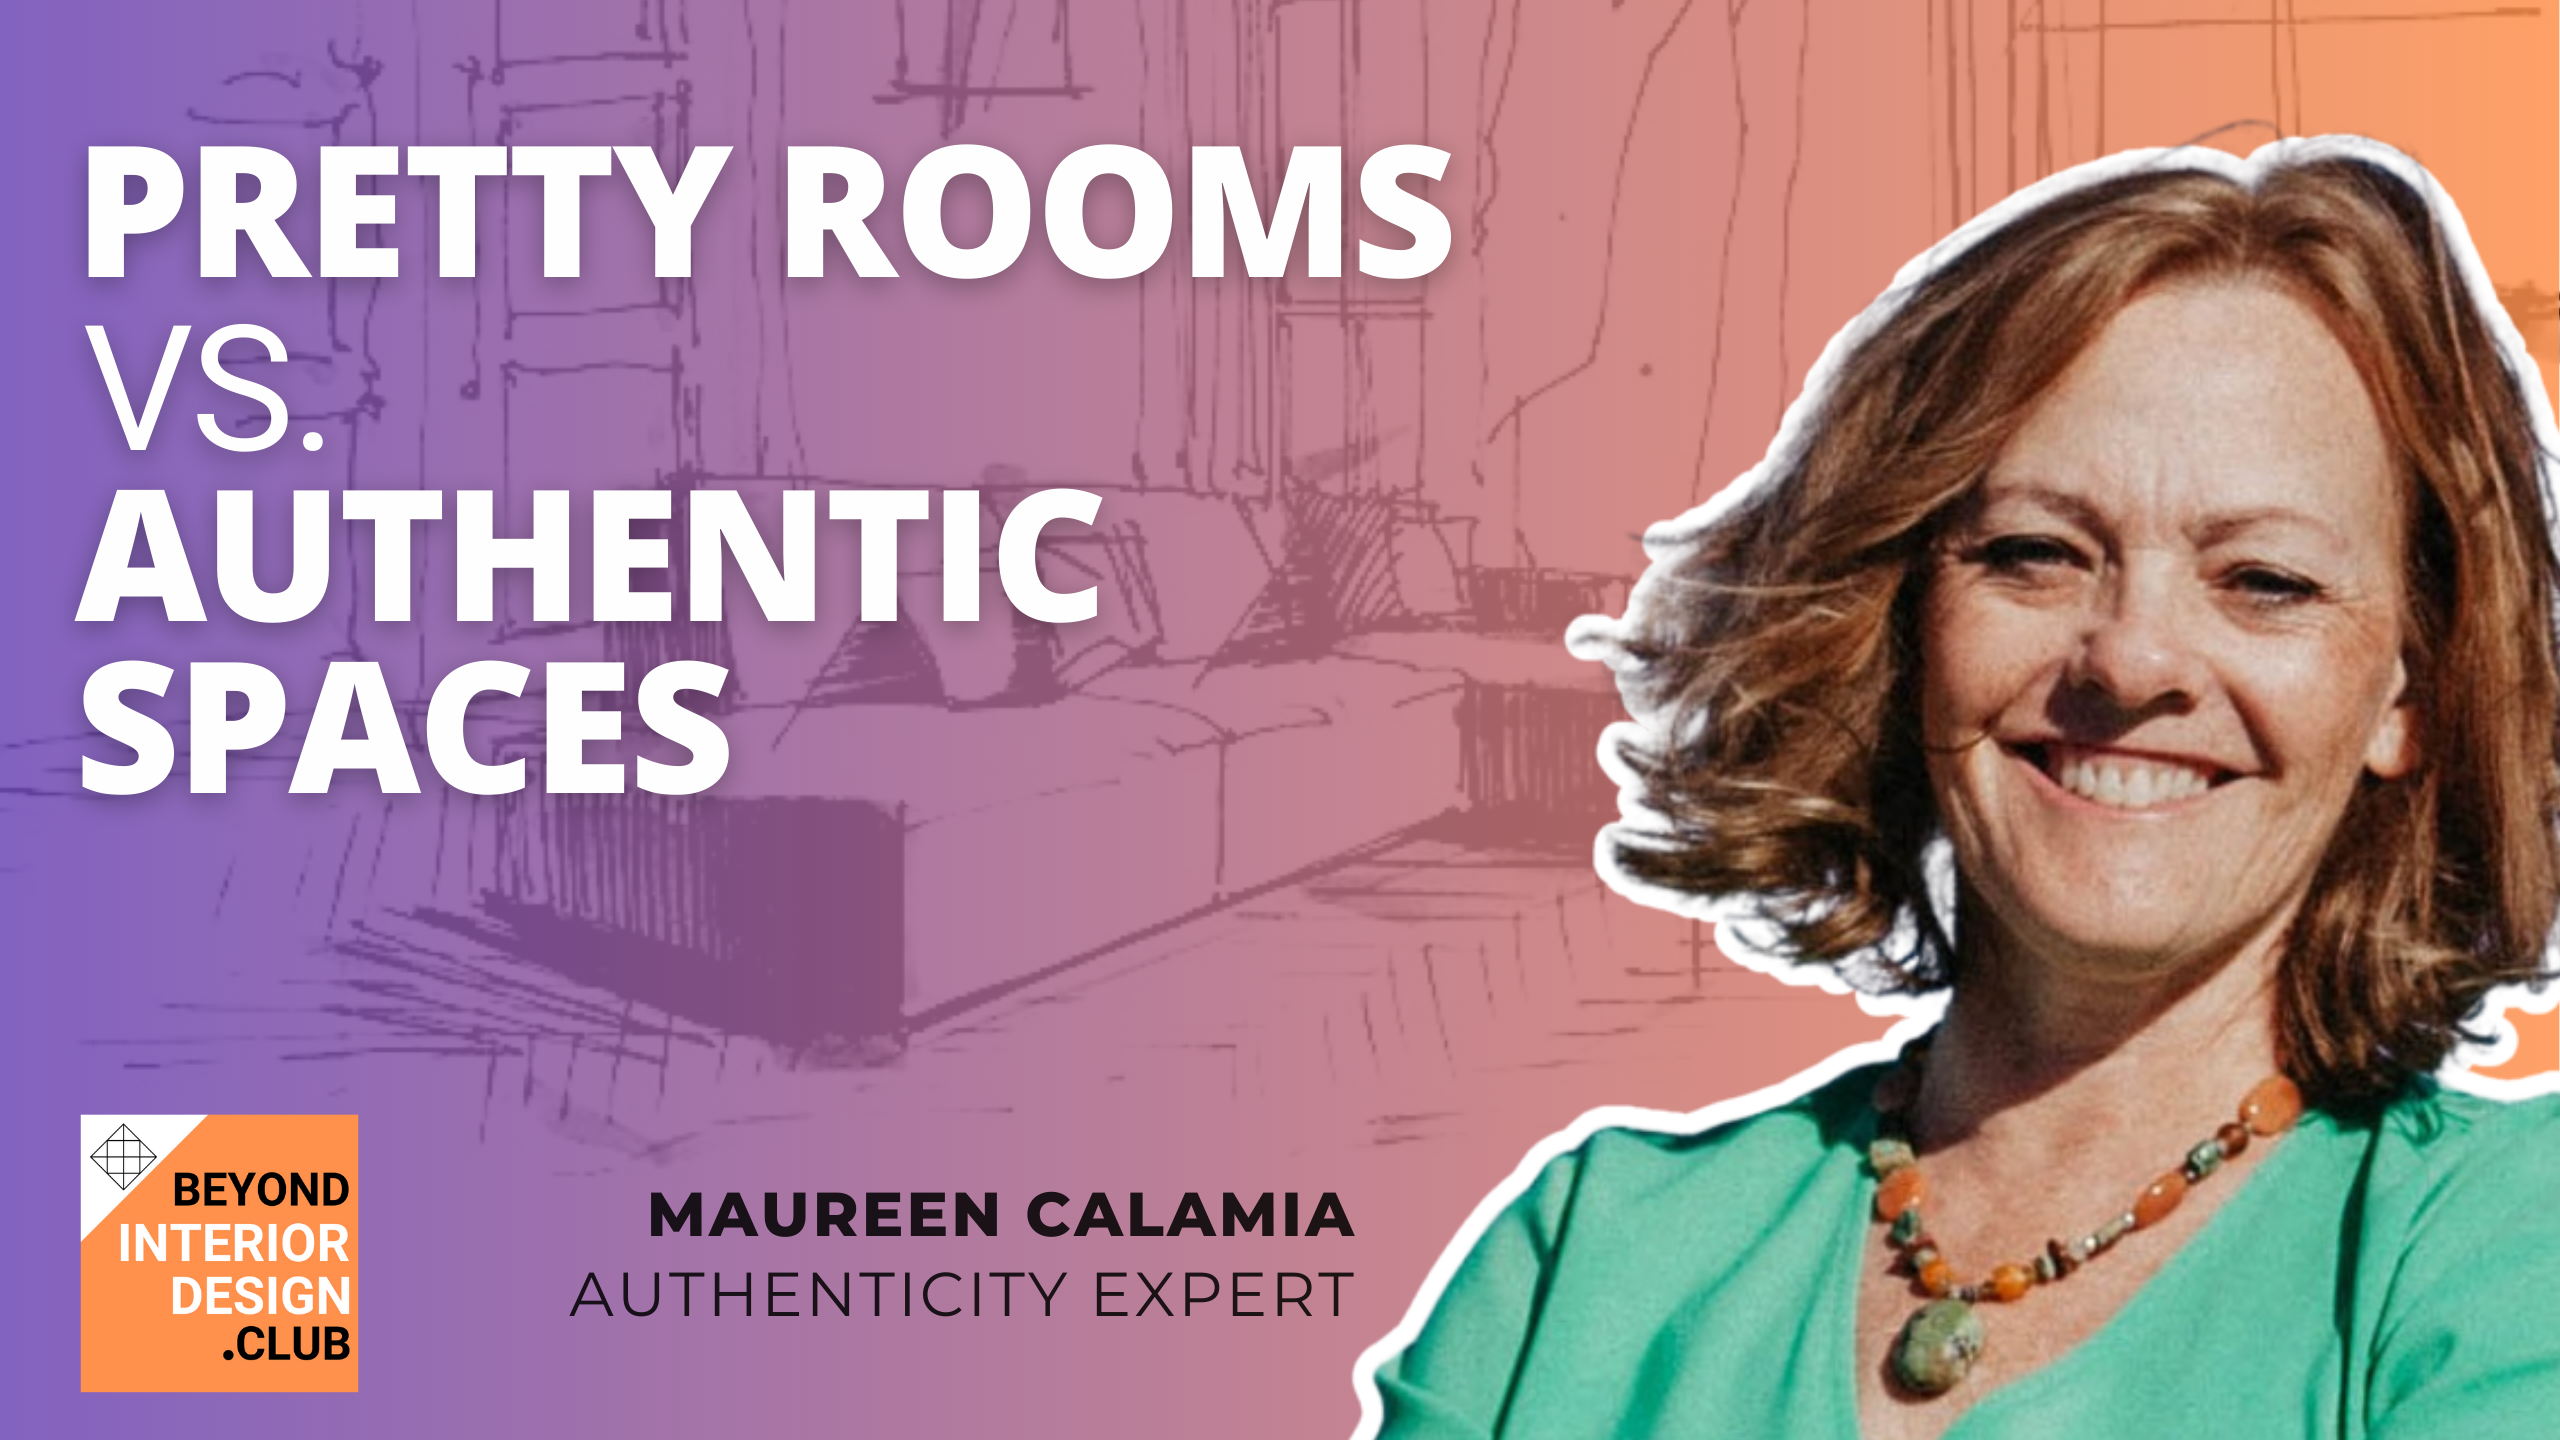 Pretty Rooms vs Authentic Spaces - with Maureen Calamia